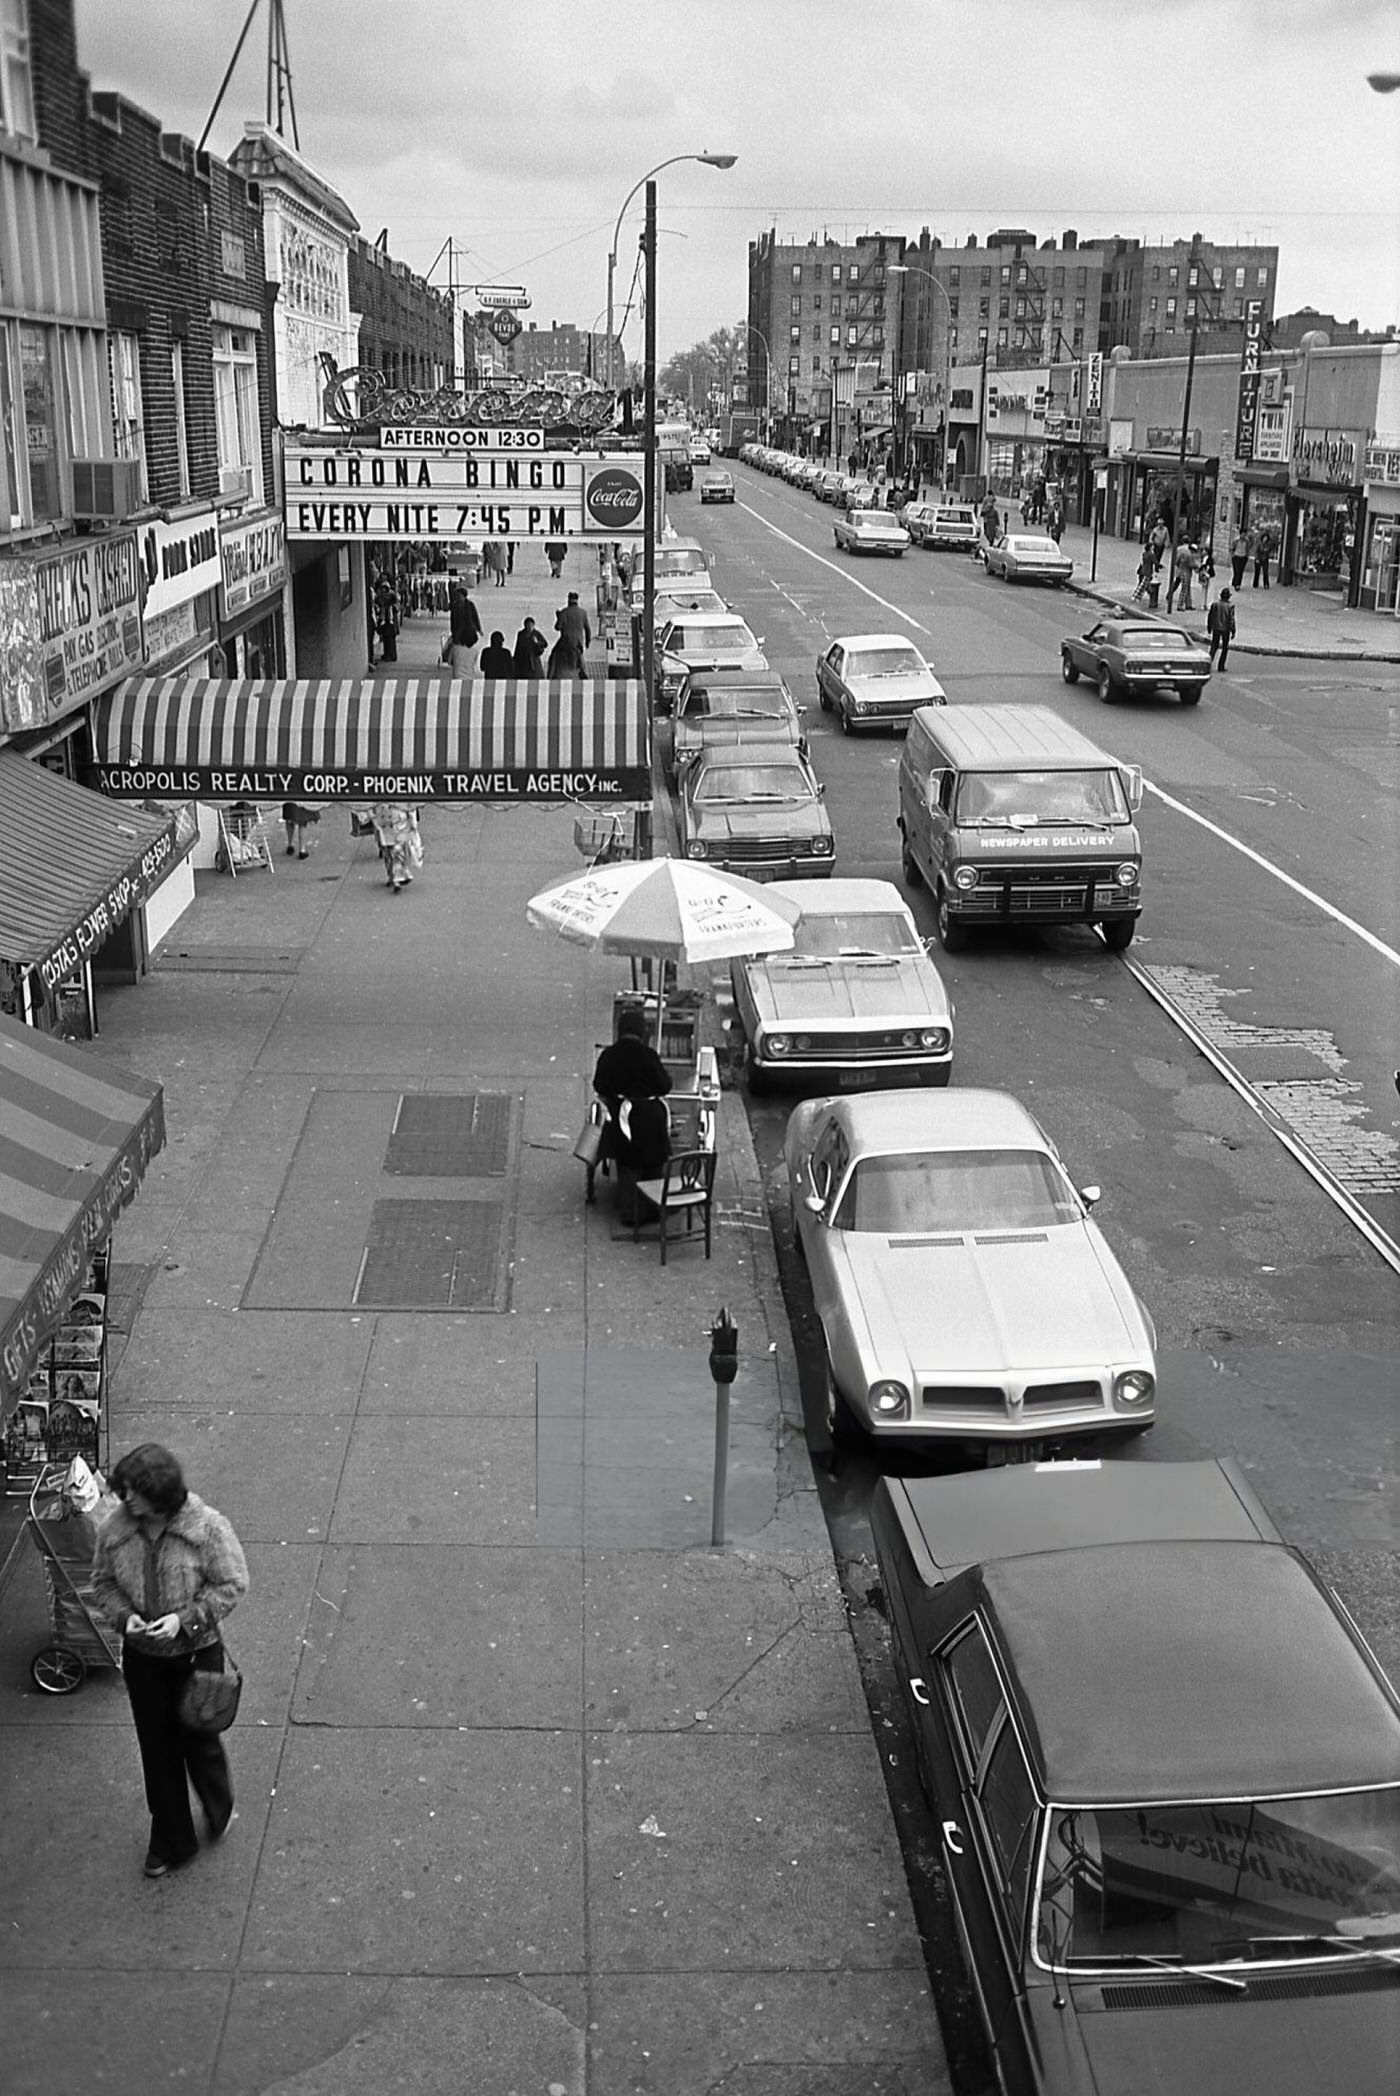 A Bingo Parlor And Other Small Businesses Lining Roosevelt Avenue In Corona, Queens, 1970S.